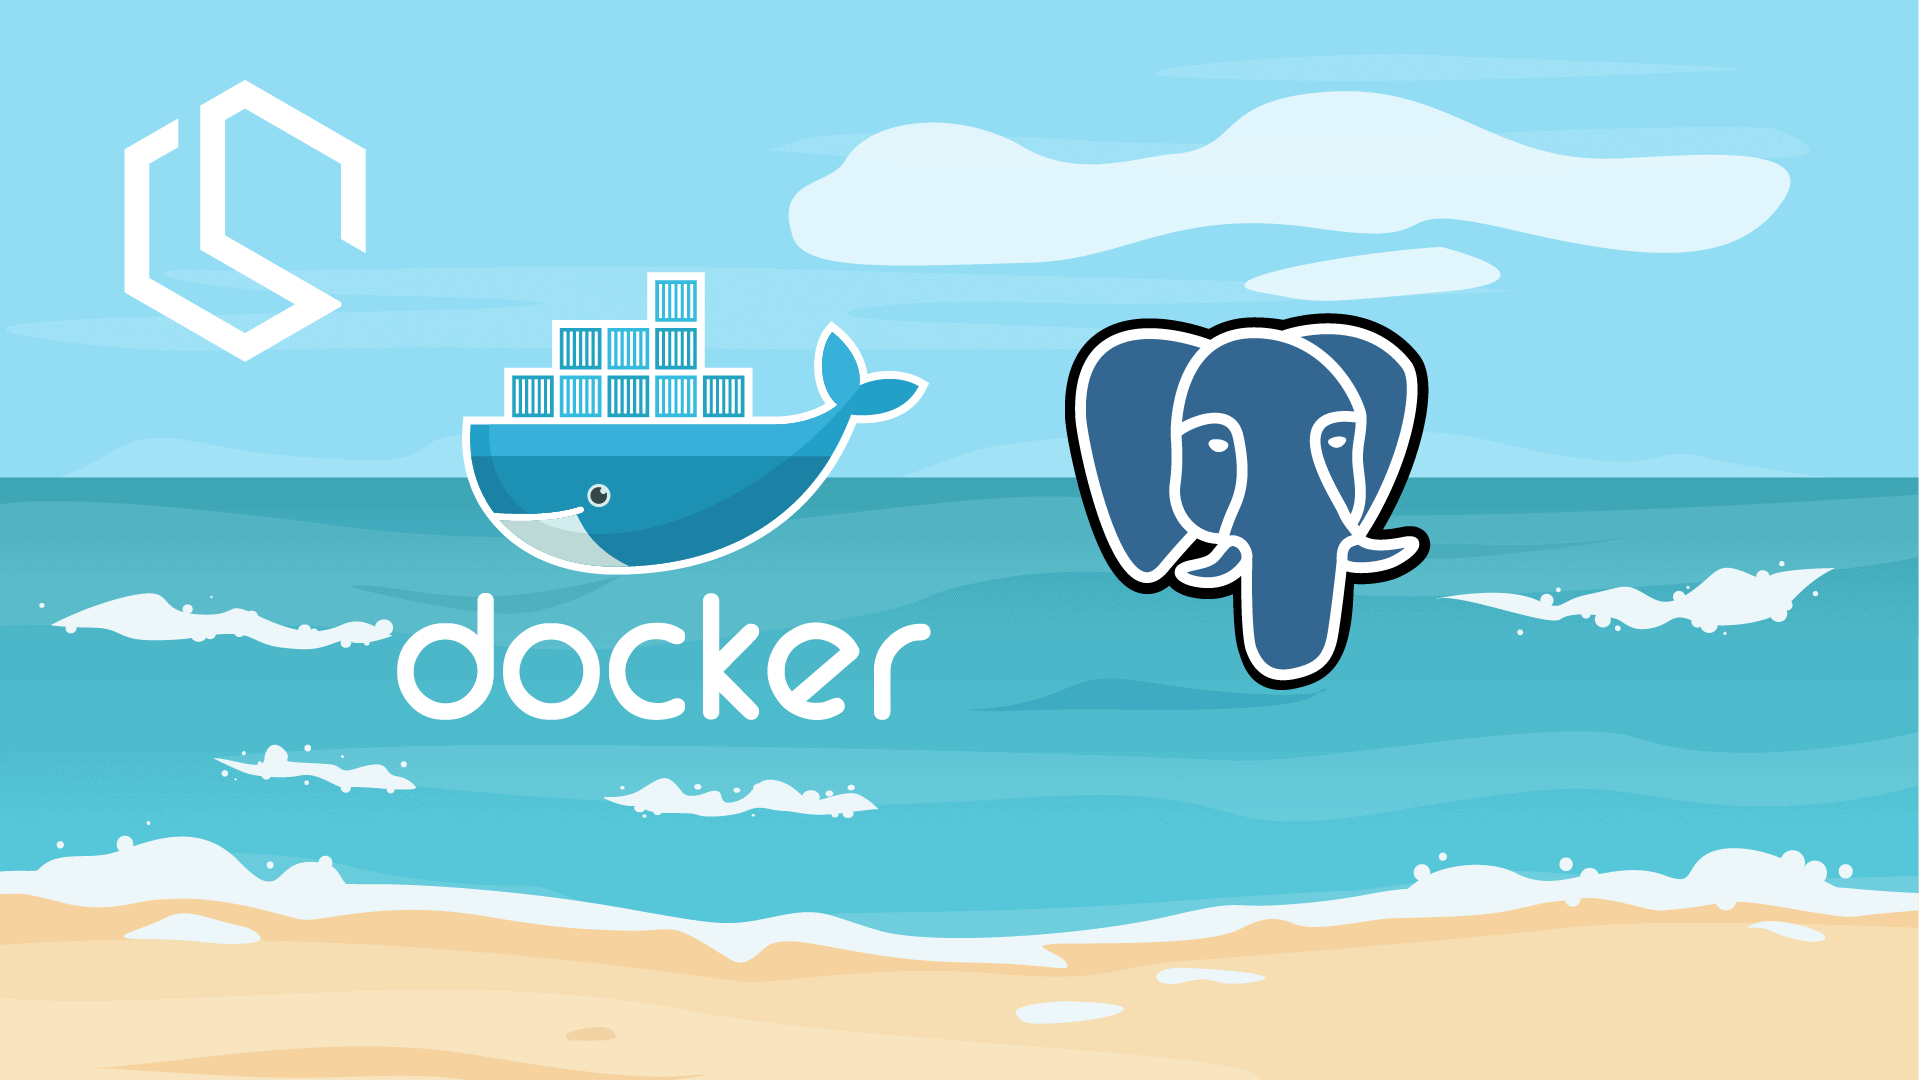 How to run a PostgreSQL database using Docker Compose in just a few minutes?